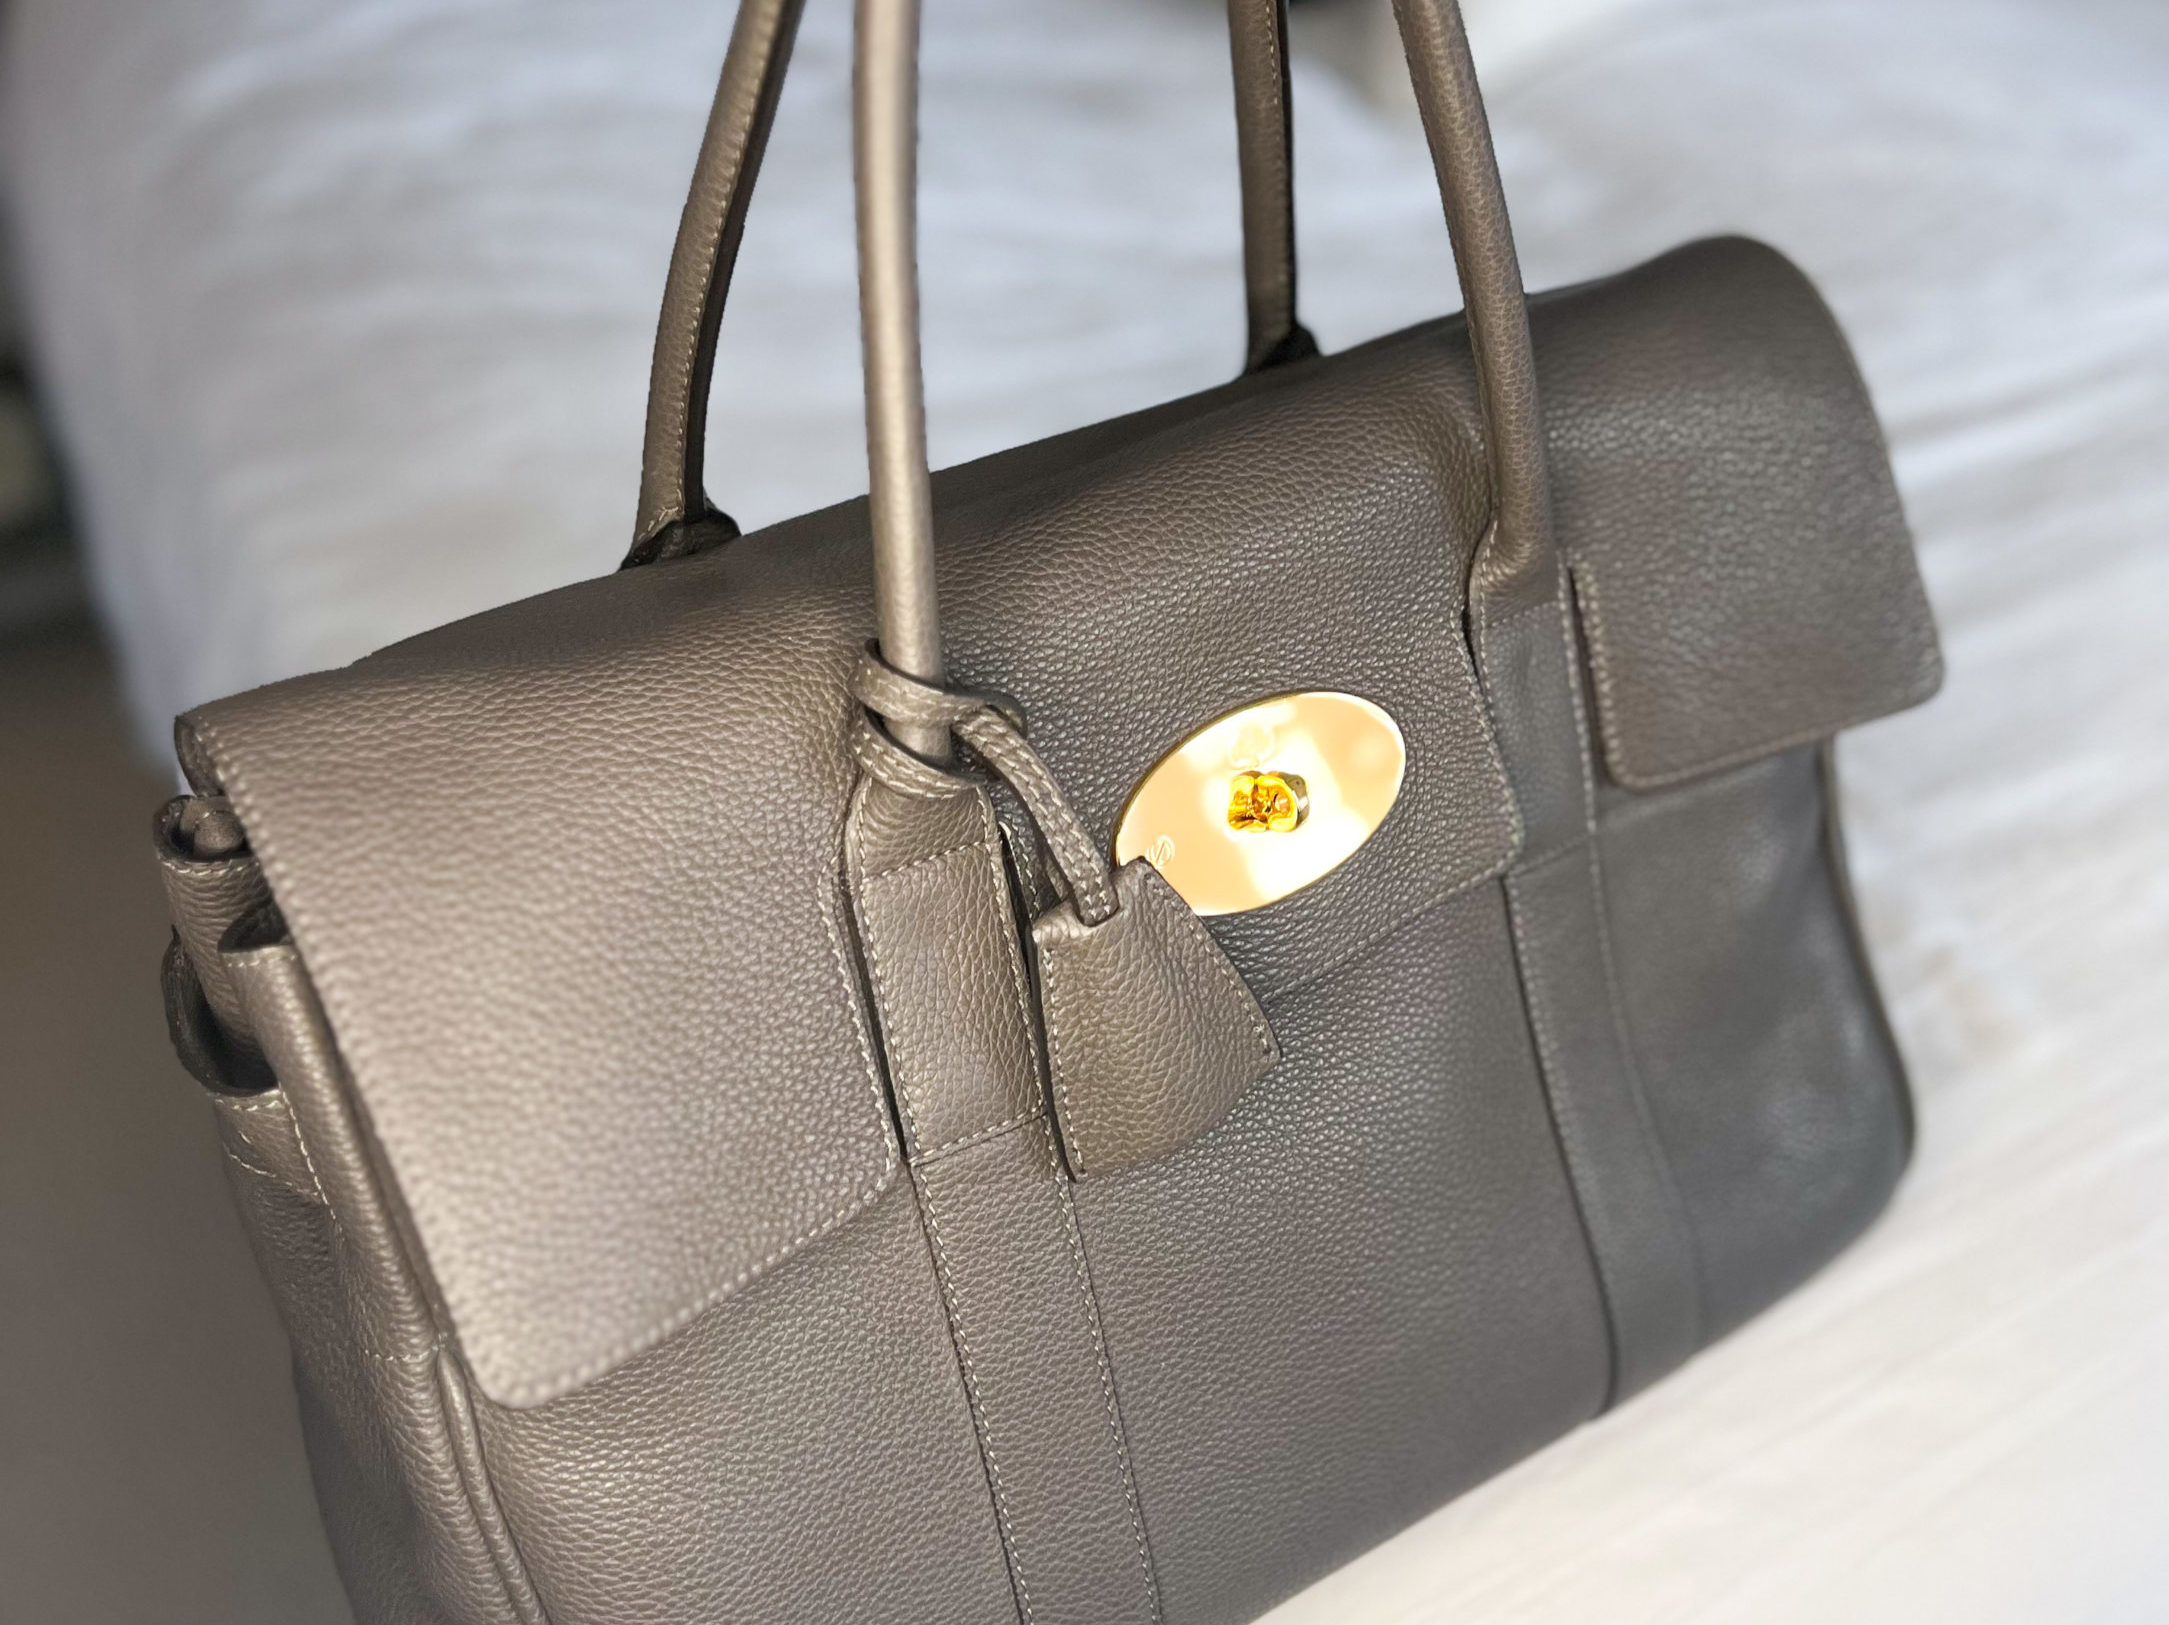 Mulberry Bayswater Review 2022 – Is It Worth It?